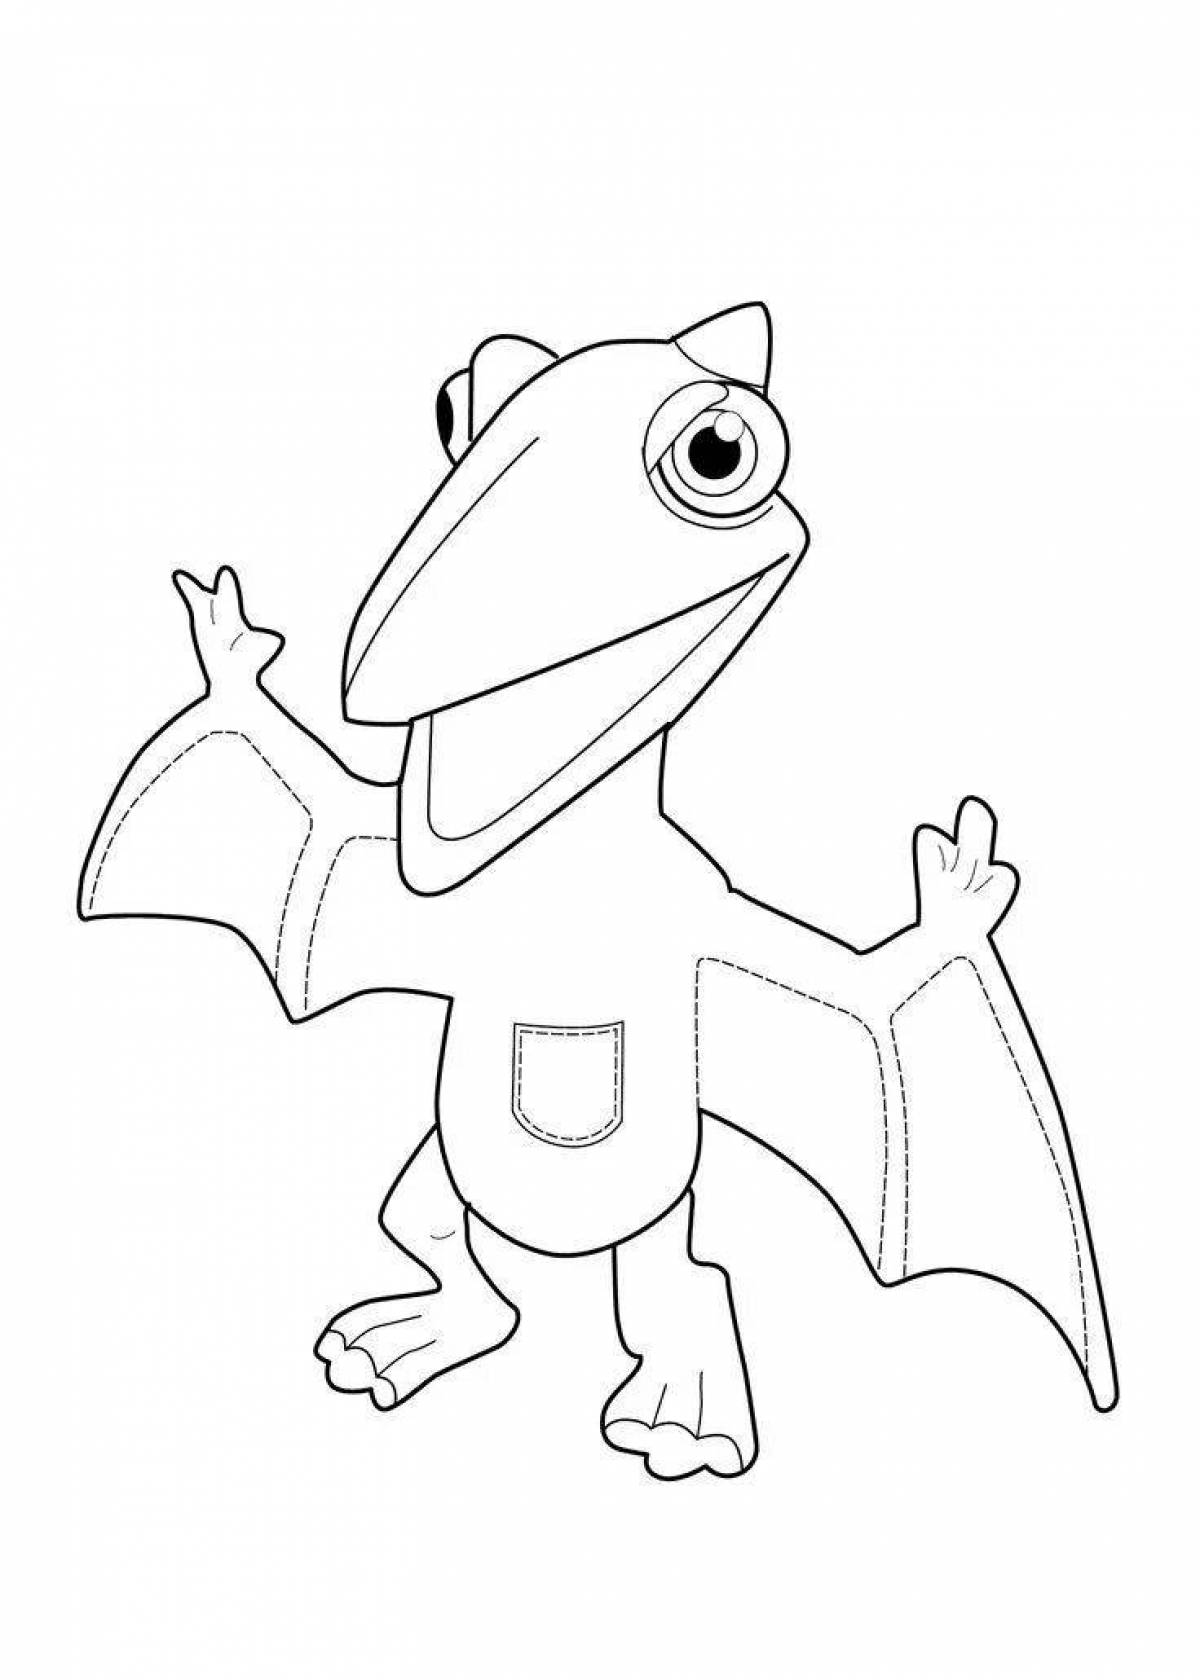 Bright Zavriki coloring pages